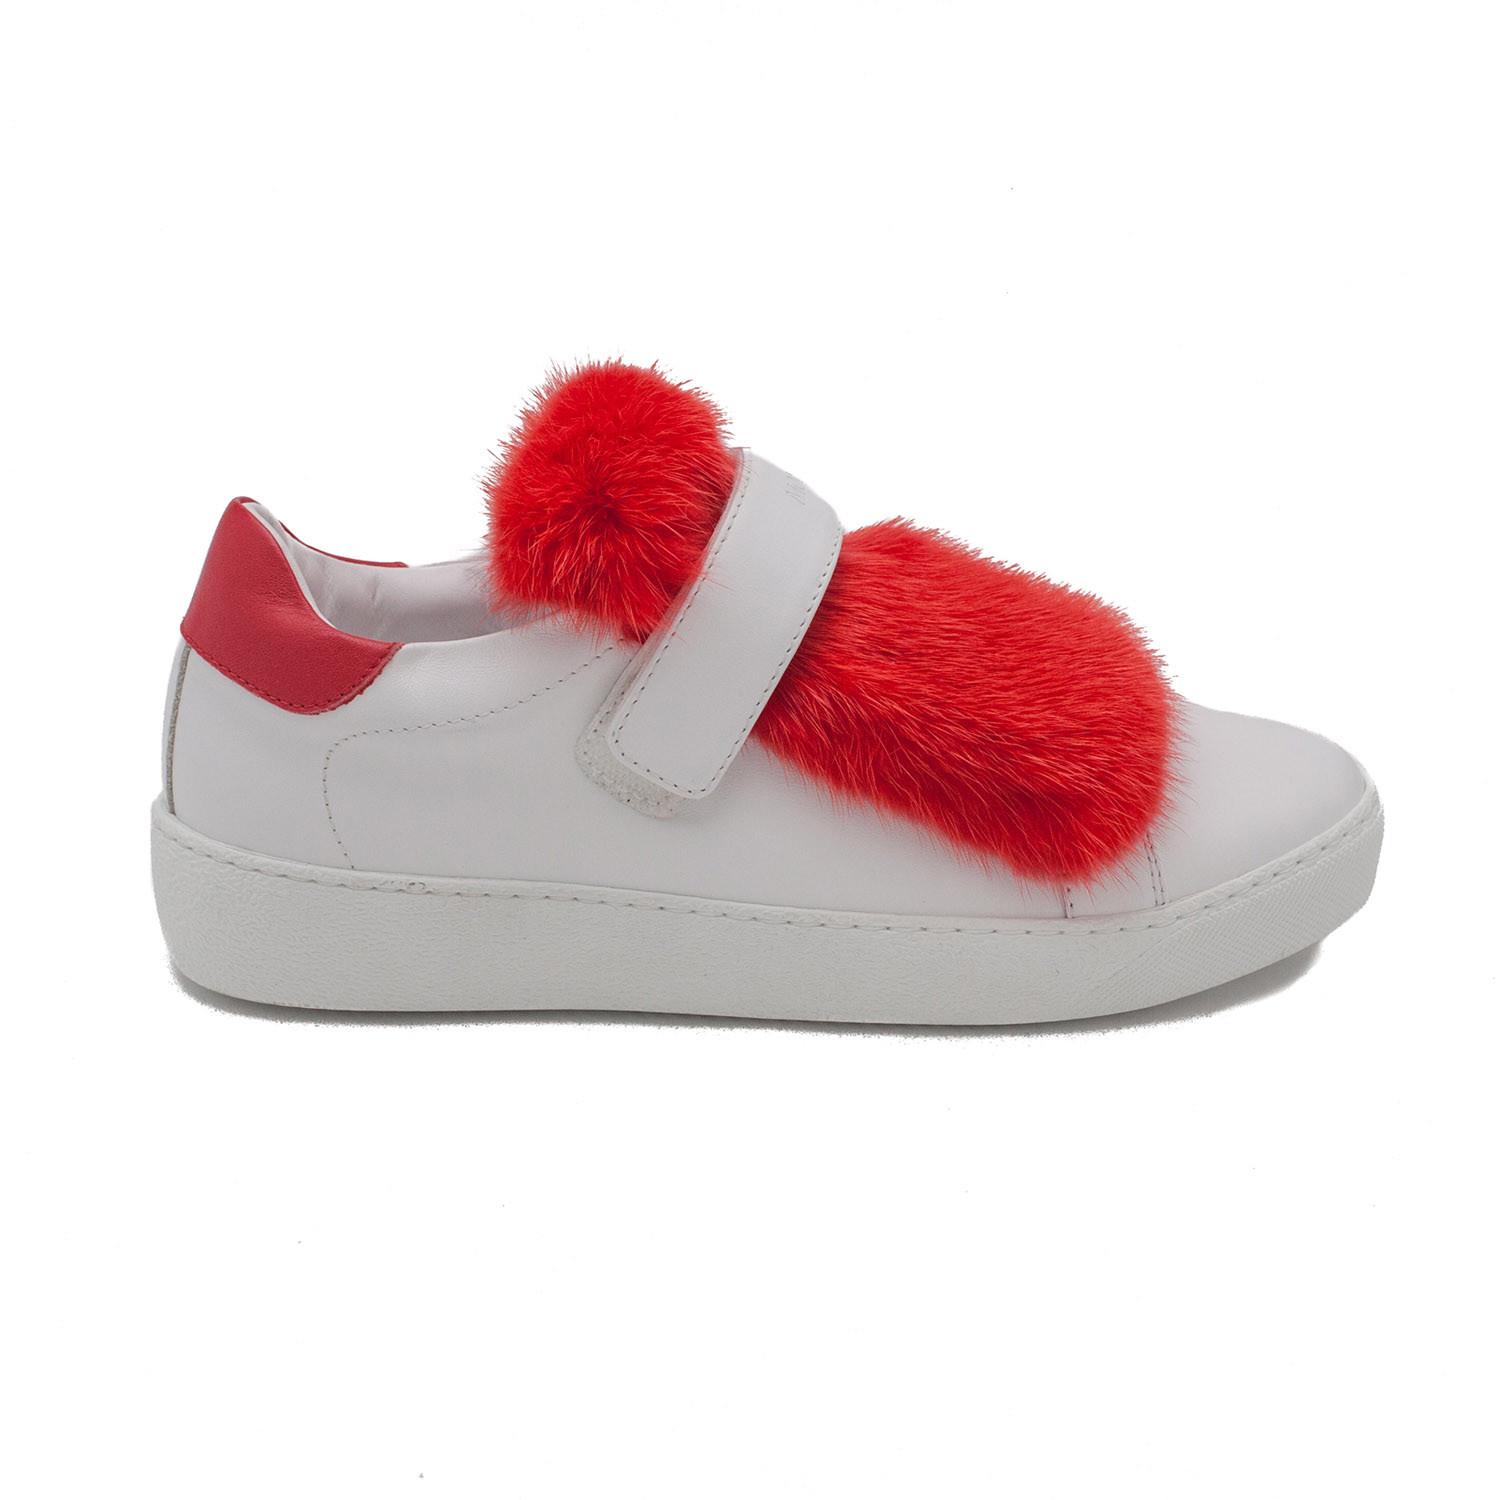 Moncler // Lucie Sneakers // Red + White (US: 5) - Stella McCartney